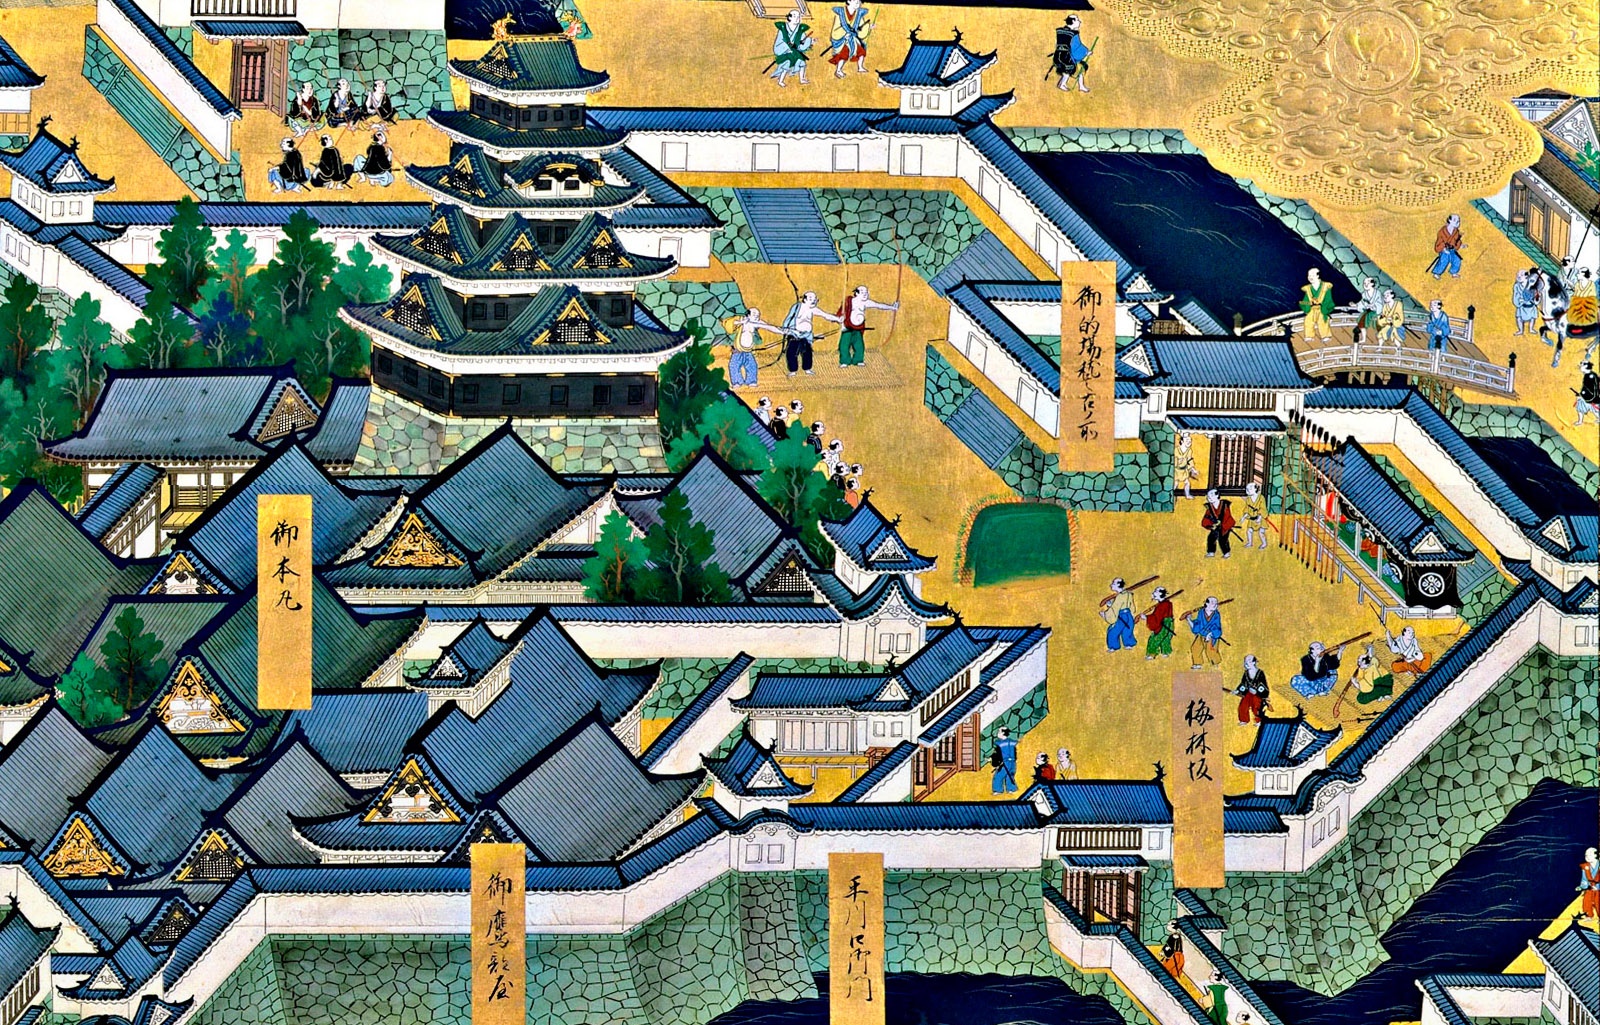 7 Incredible Events at Japanese Castles